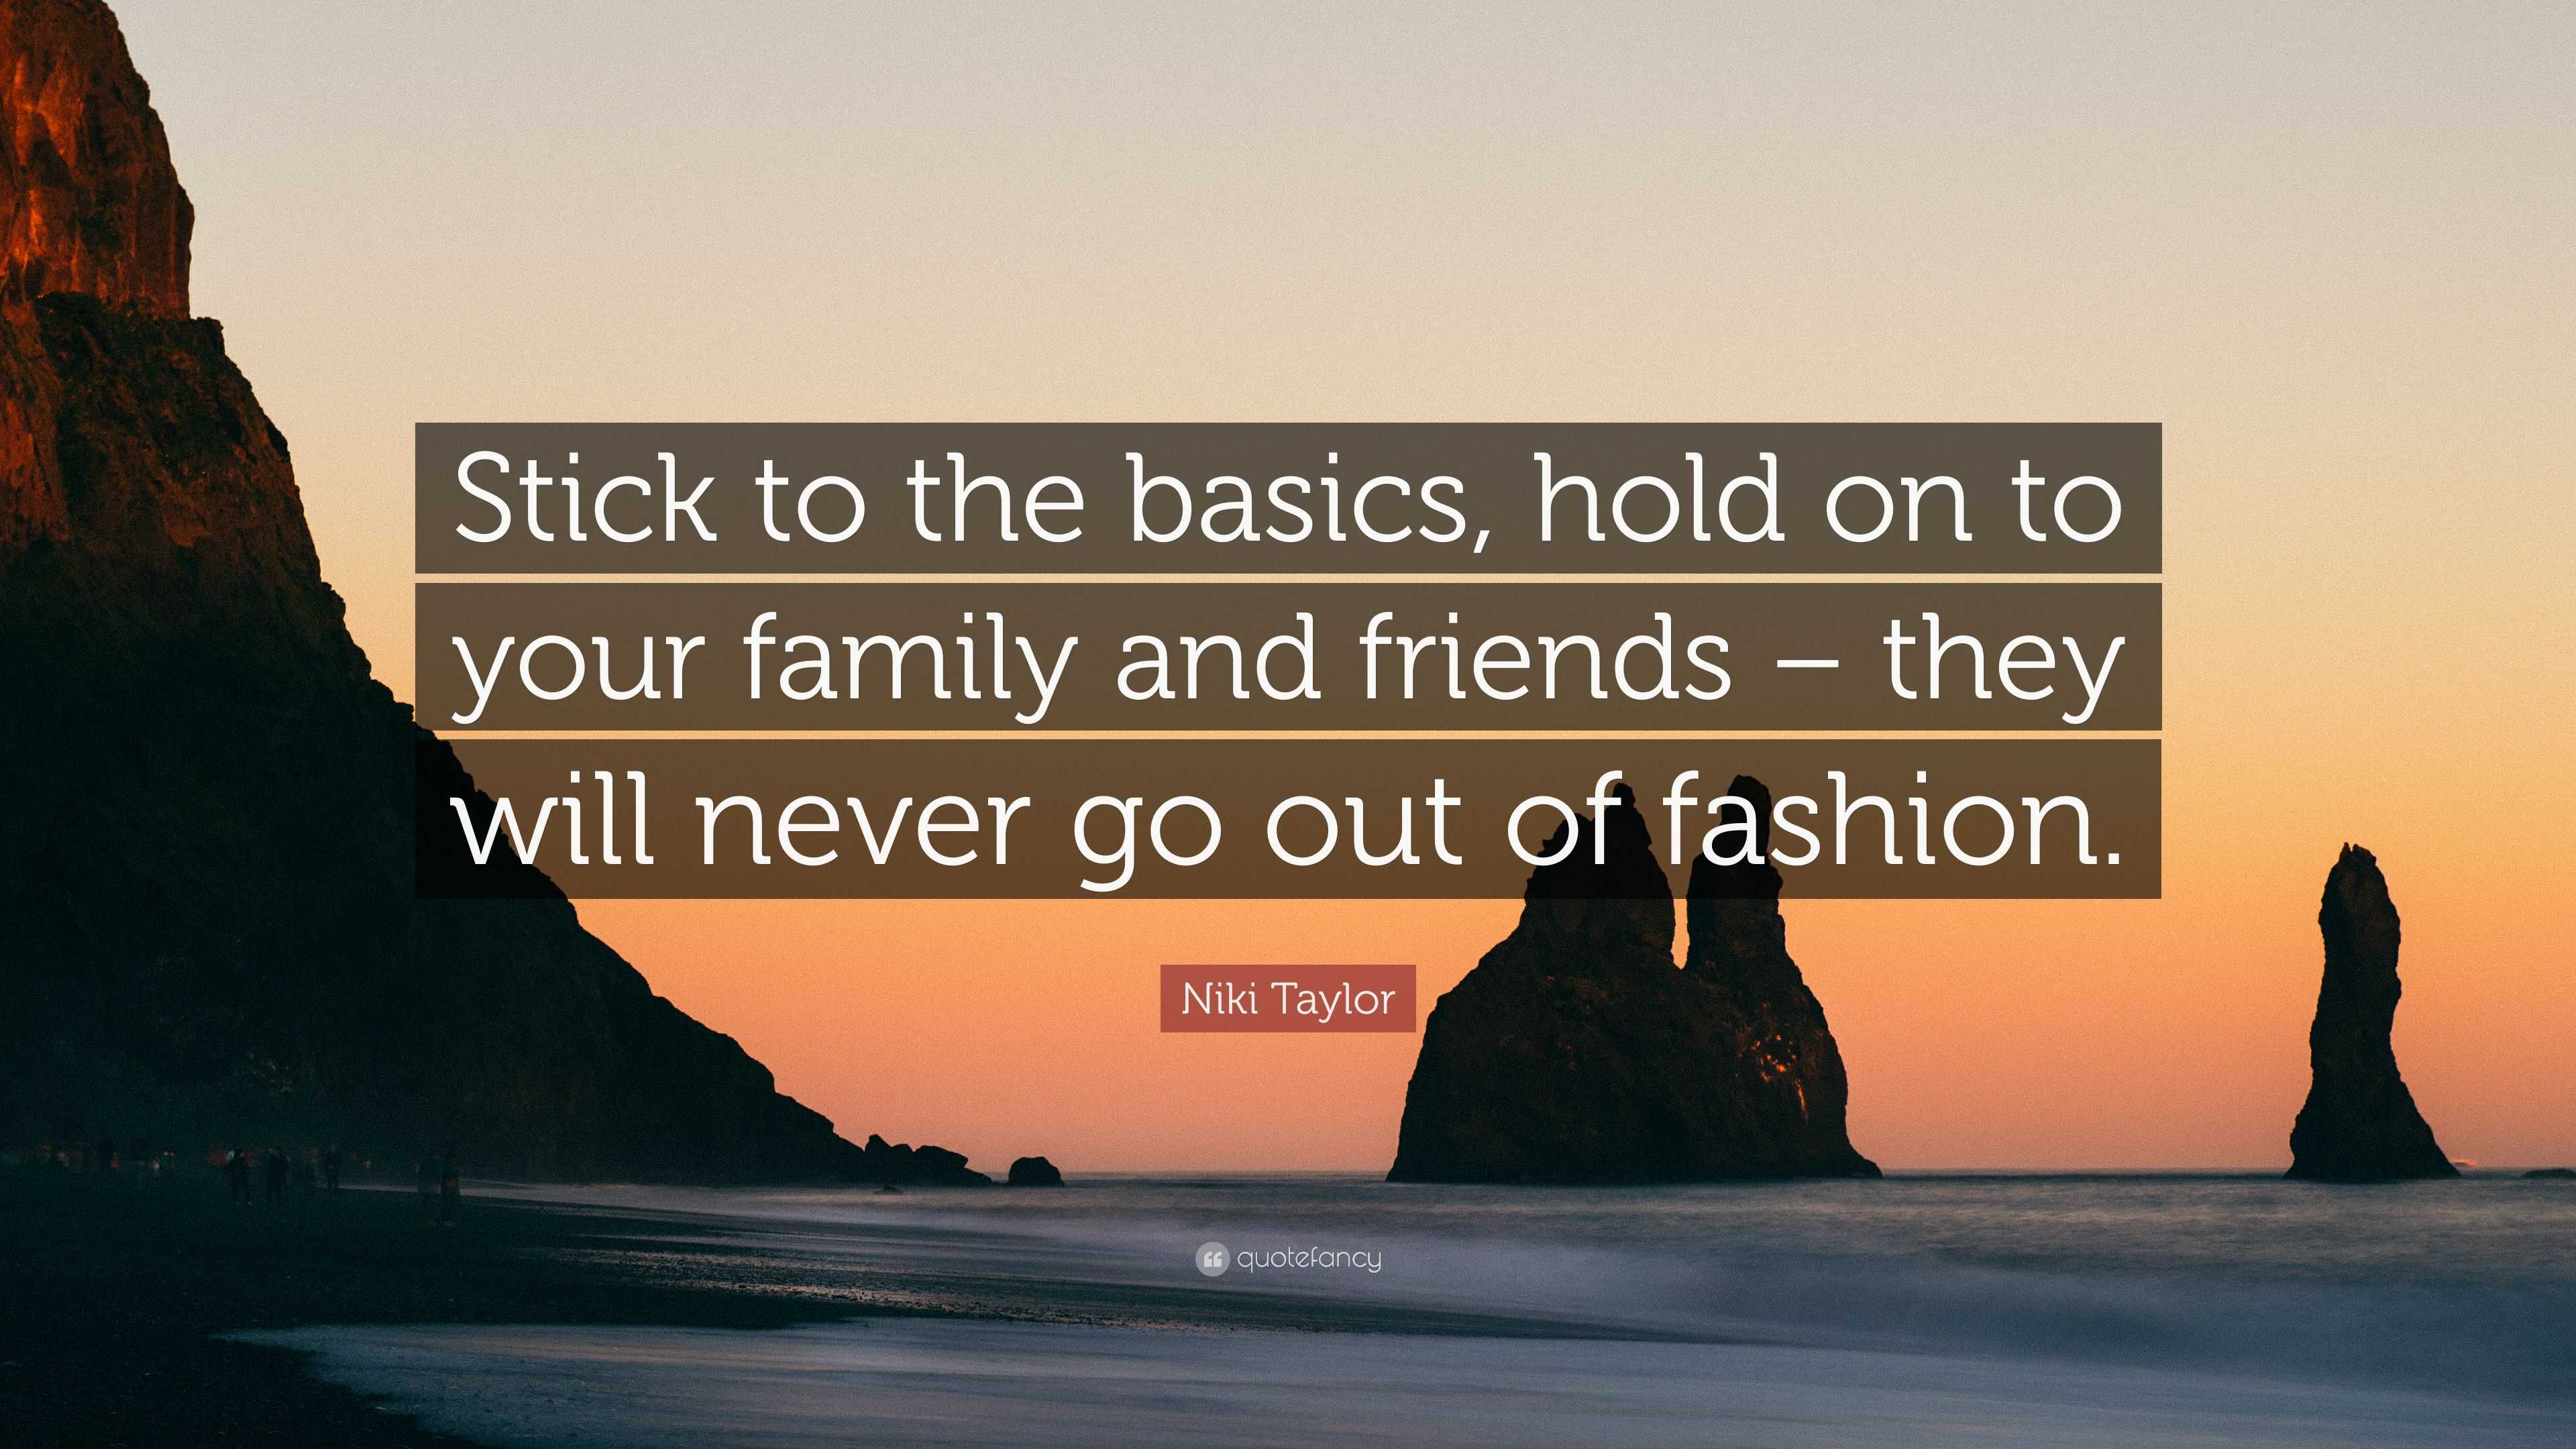 Niki Taylor Quote: “Stick to the basics, hold on to your family and friends  – they will